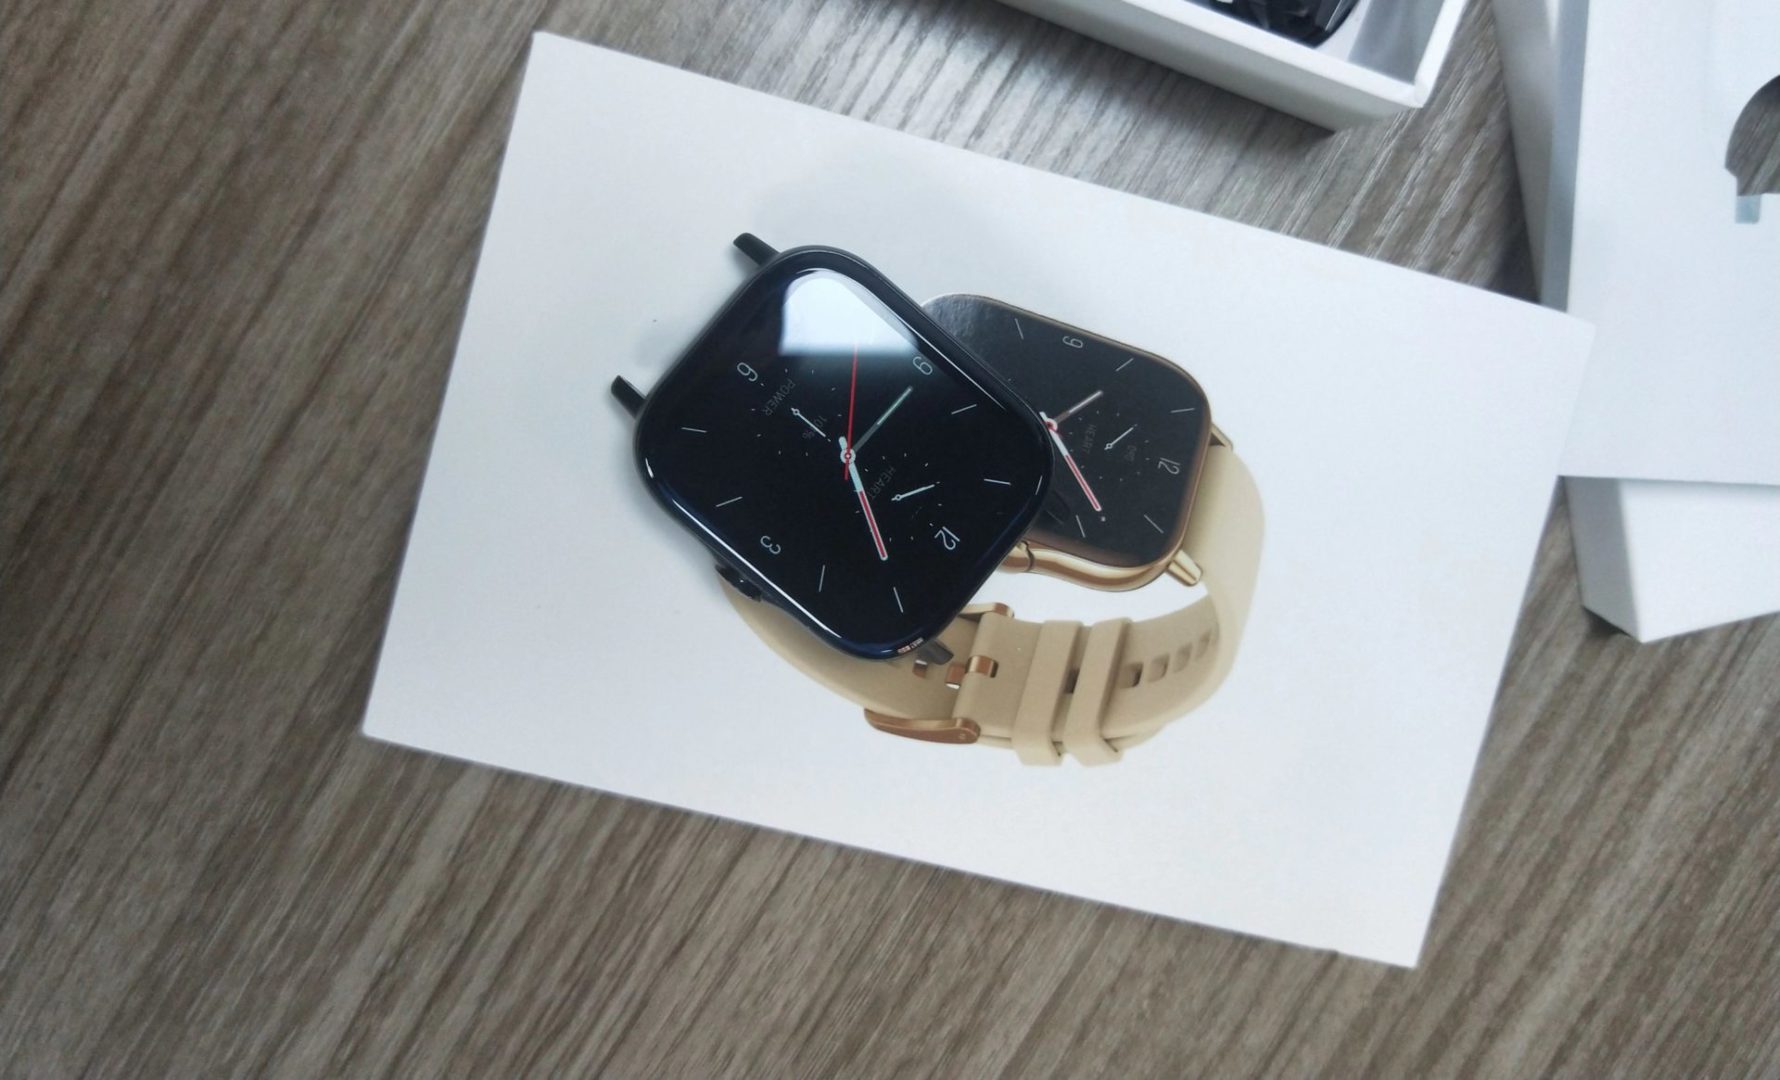 dt94-smartwatch-review